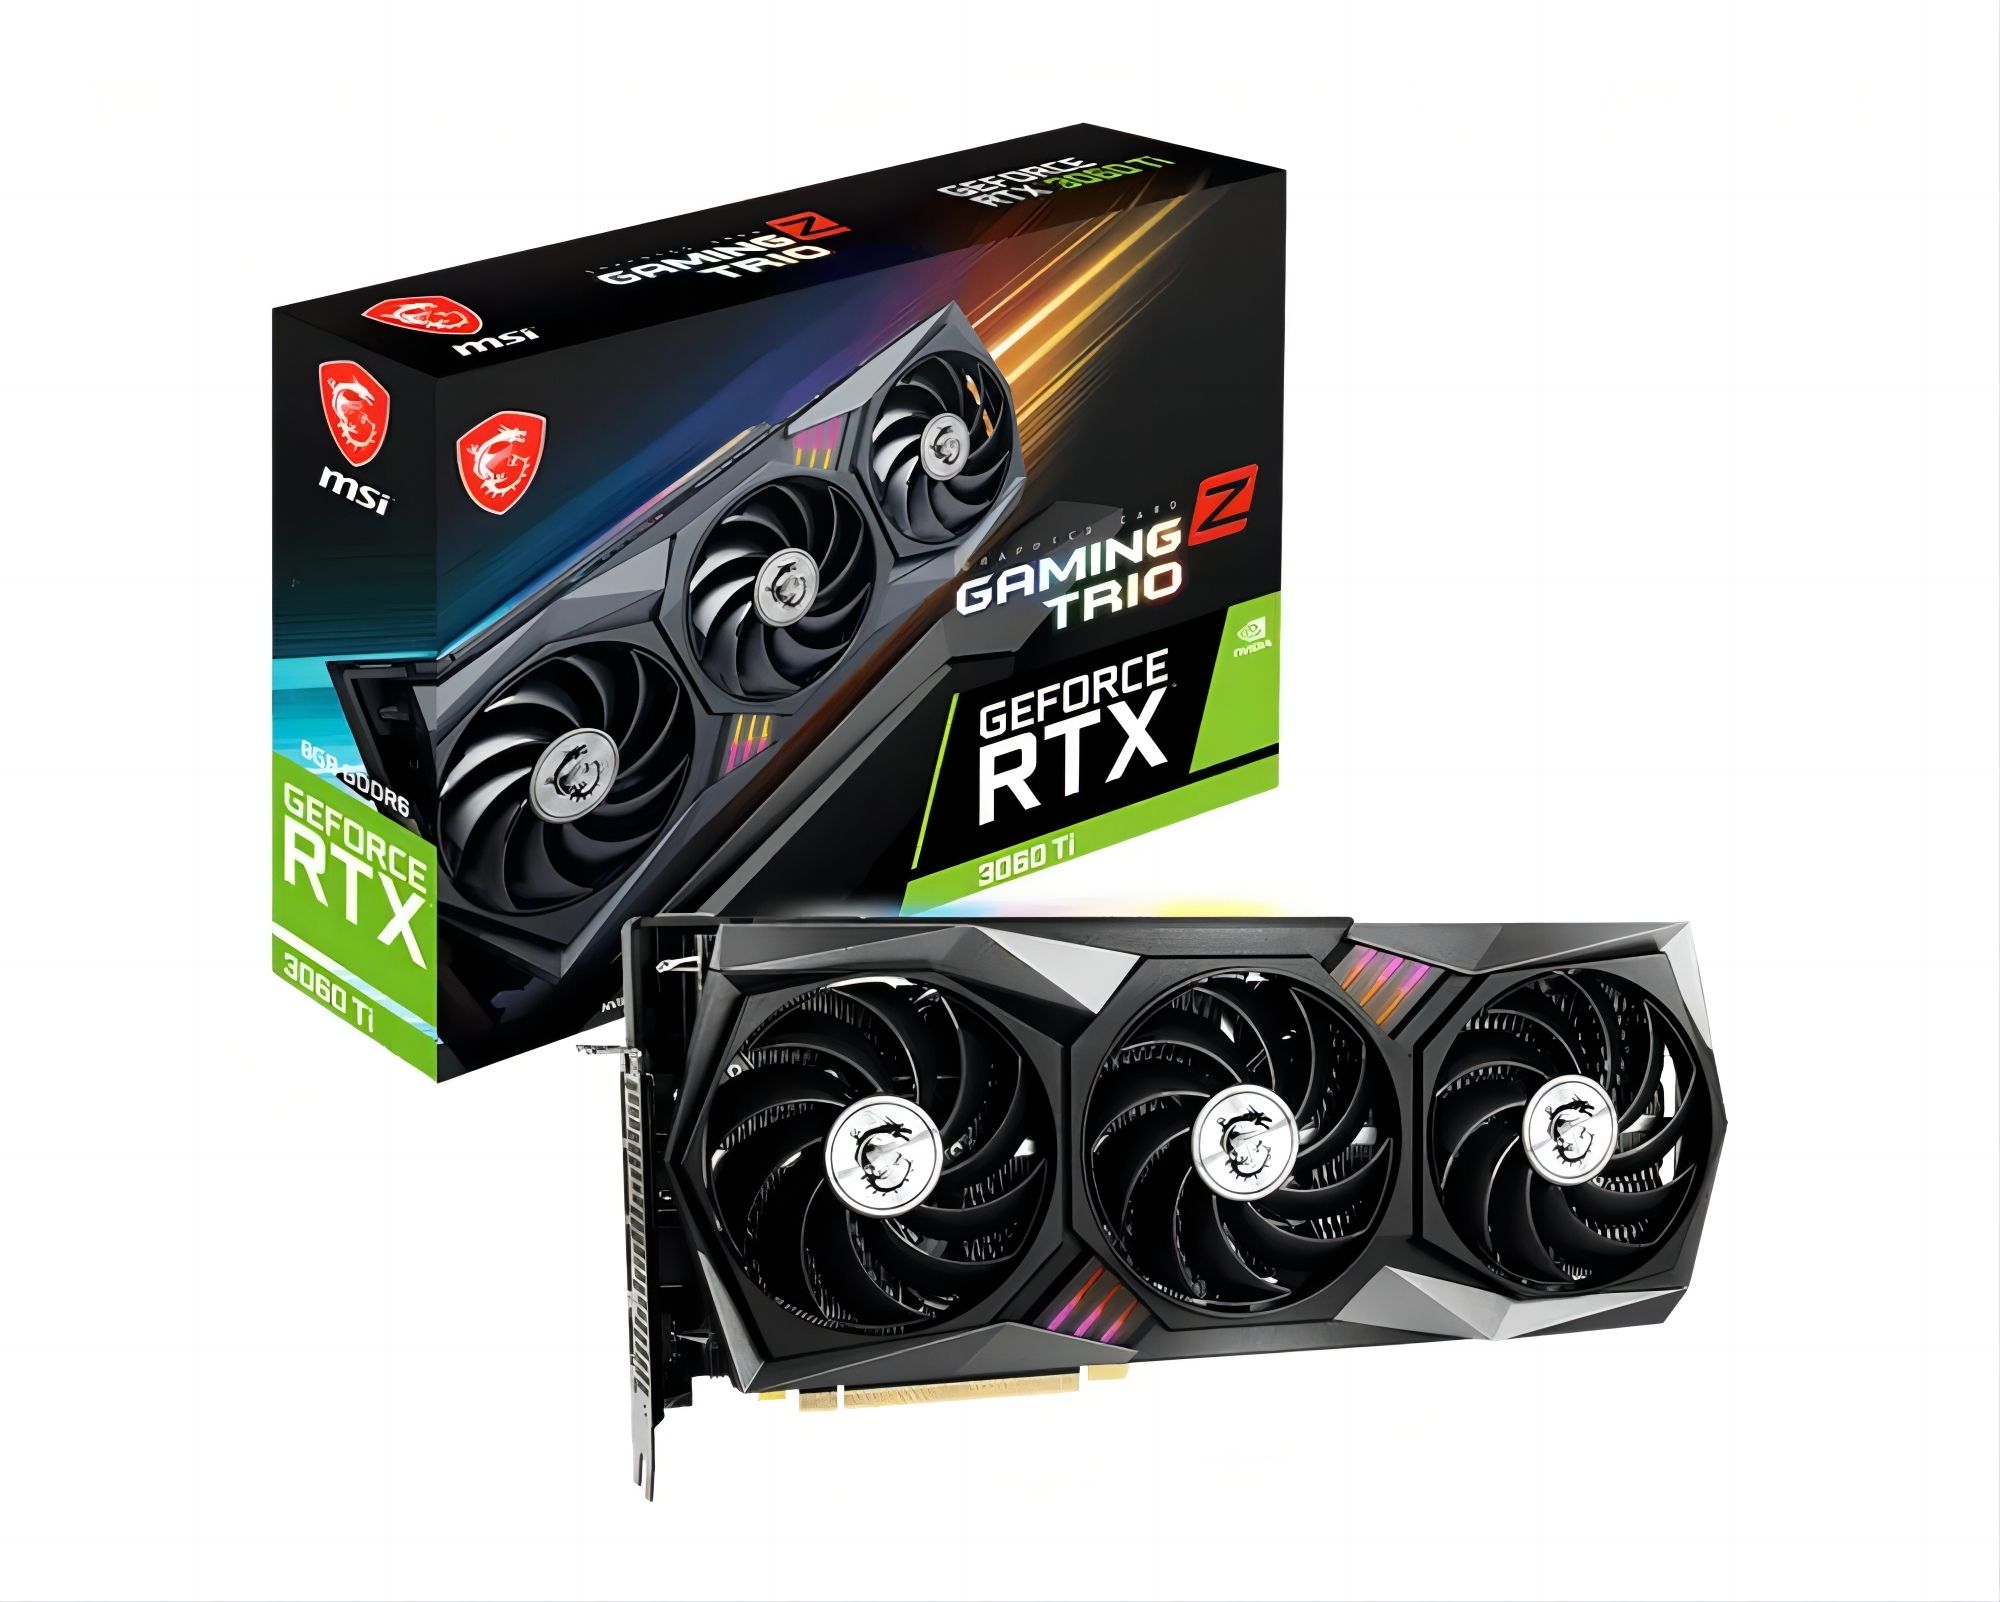 Best-in-Class Graphic Performance! Get Your Hands on RTX 2060’s Savory Specs!